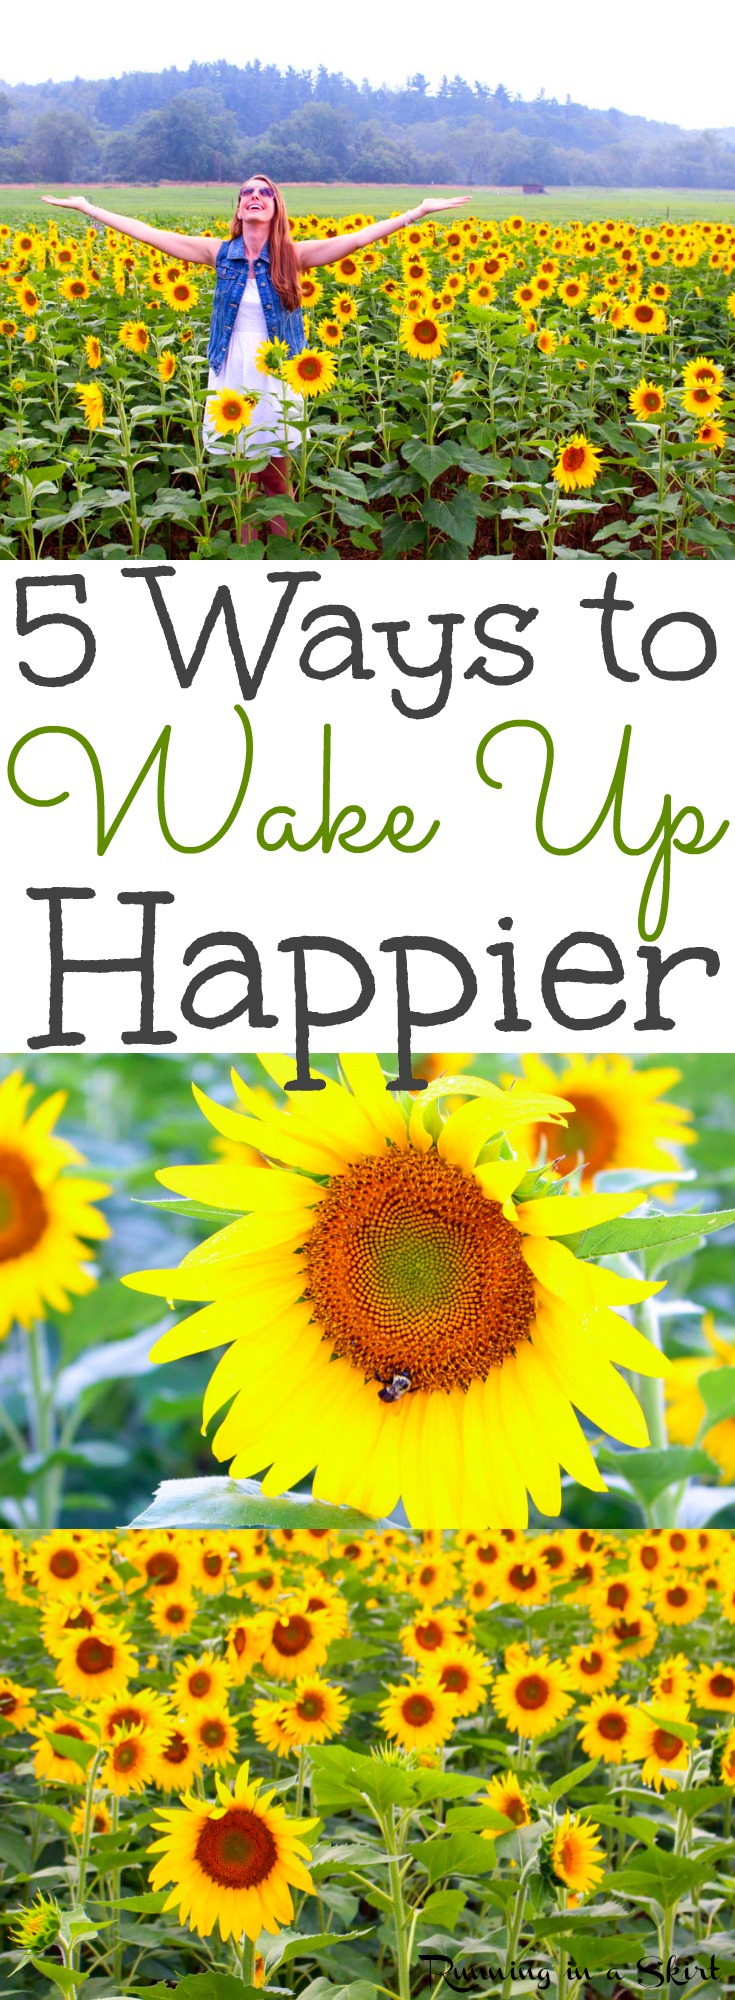 5 Ways to Wake Up Happier- a healthy wake up routine and tips to get the most out of your morning and feel good. Simple motivation and inspiration to actually feel positive in the mornings. / Running in a Skirt via @juliewunder